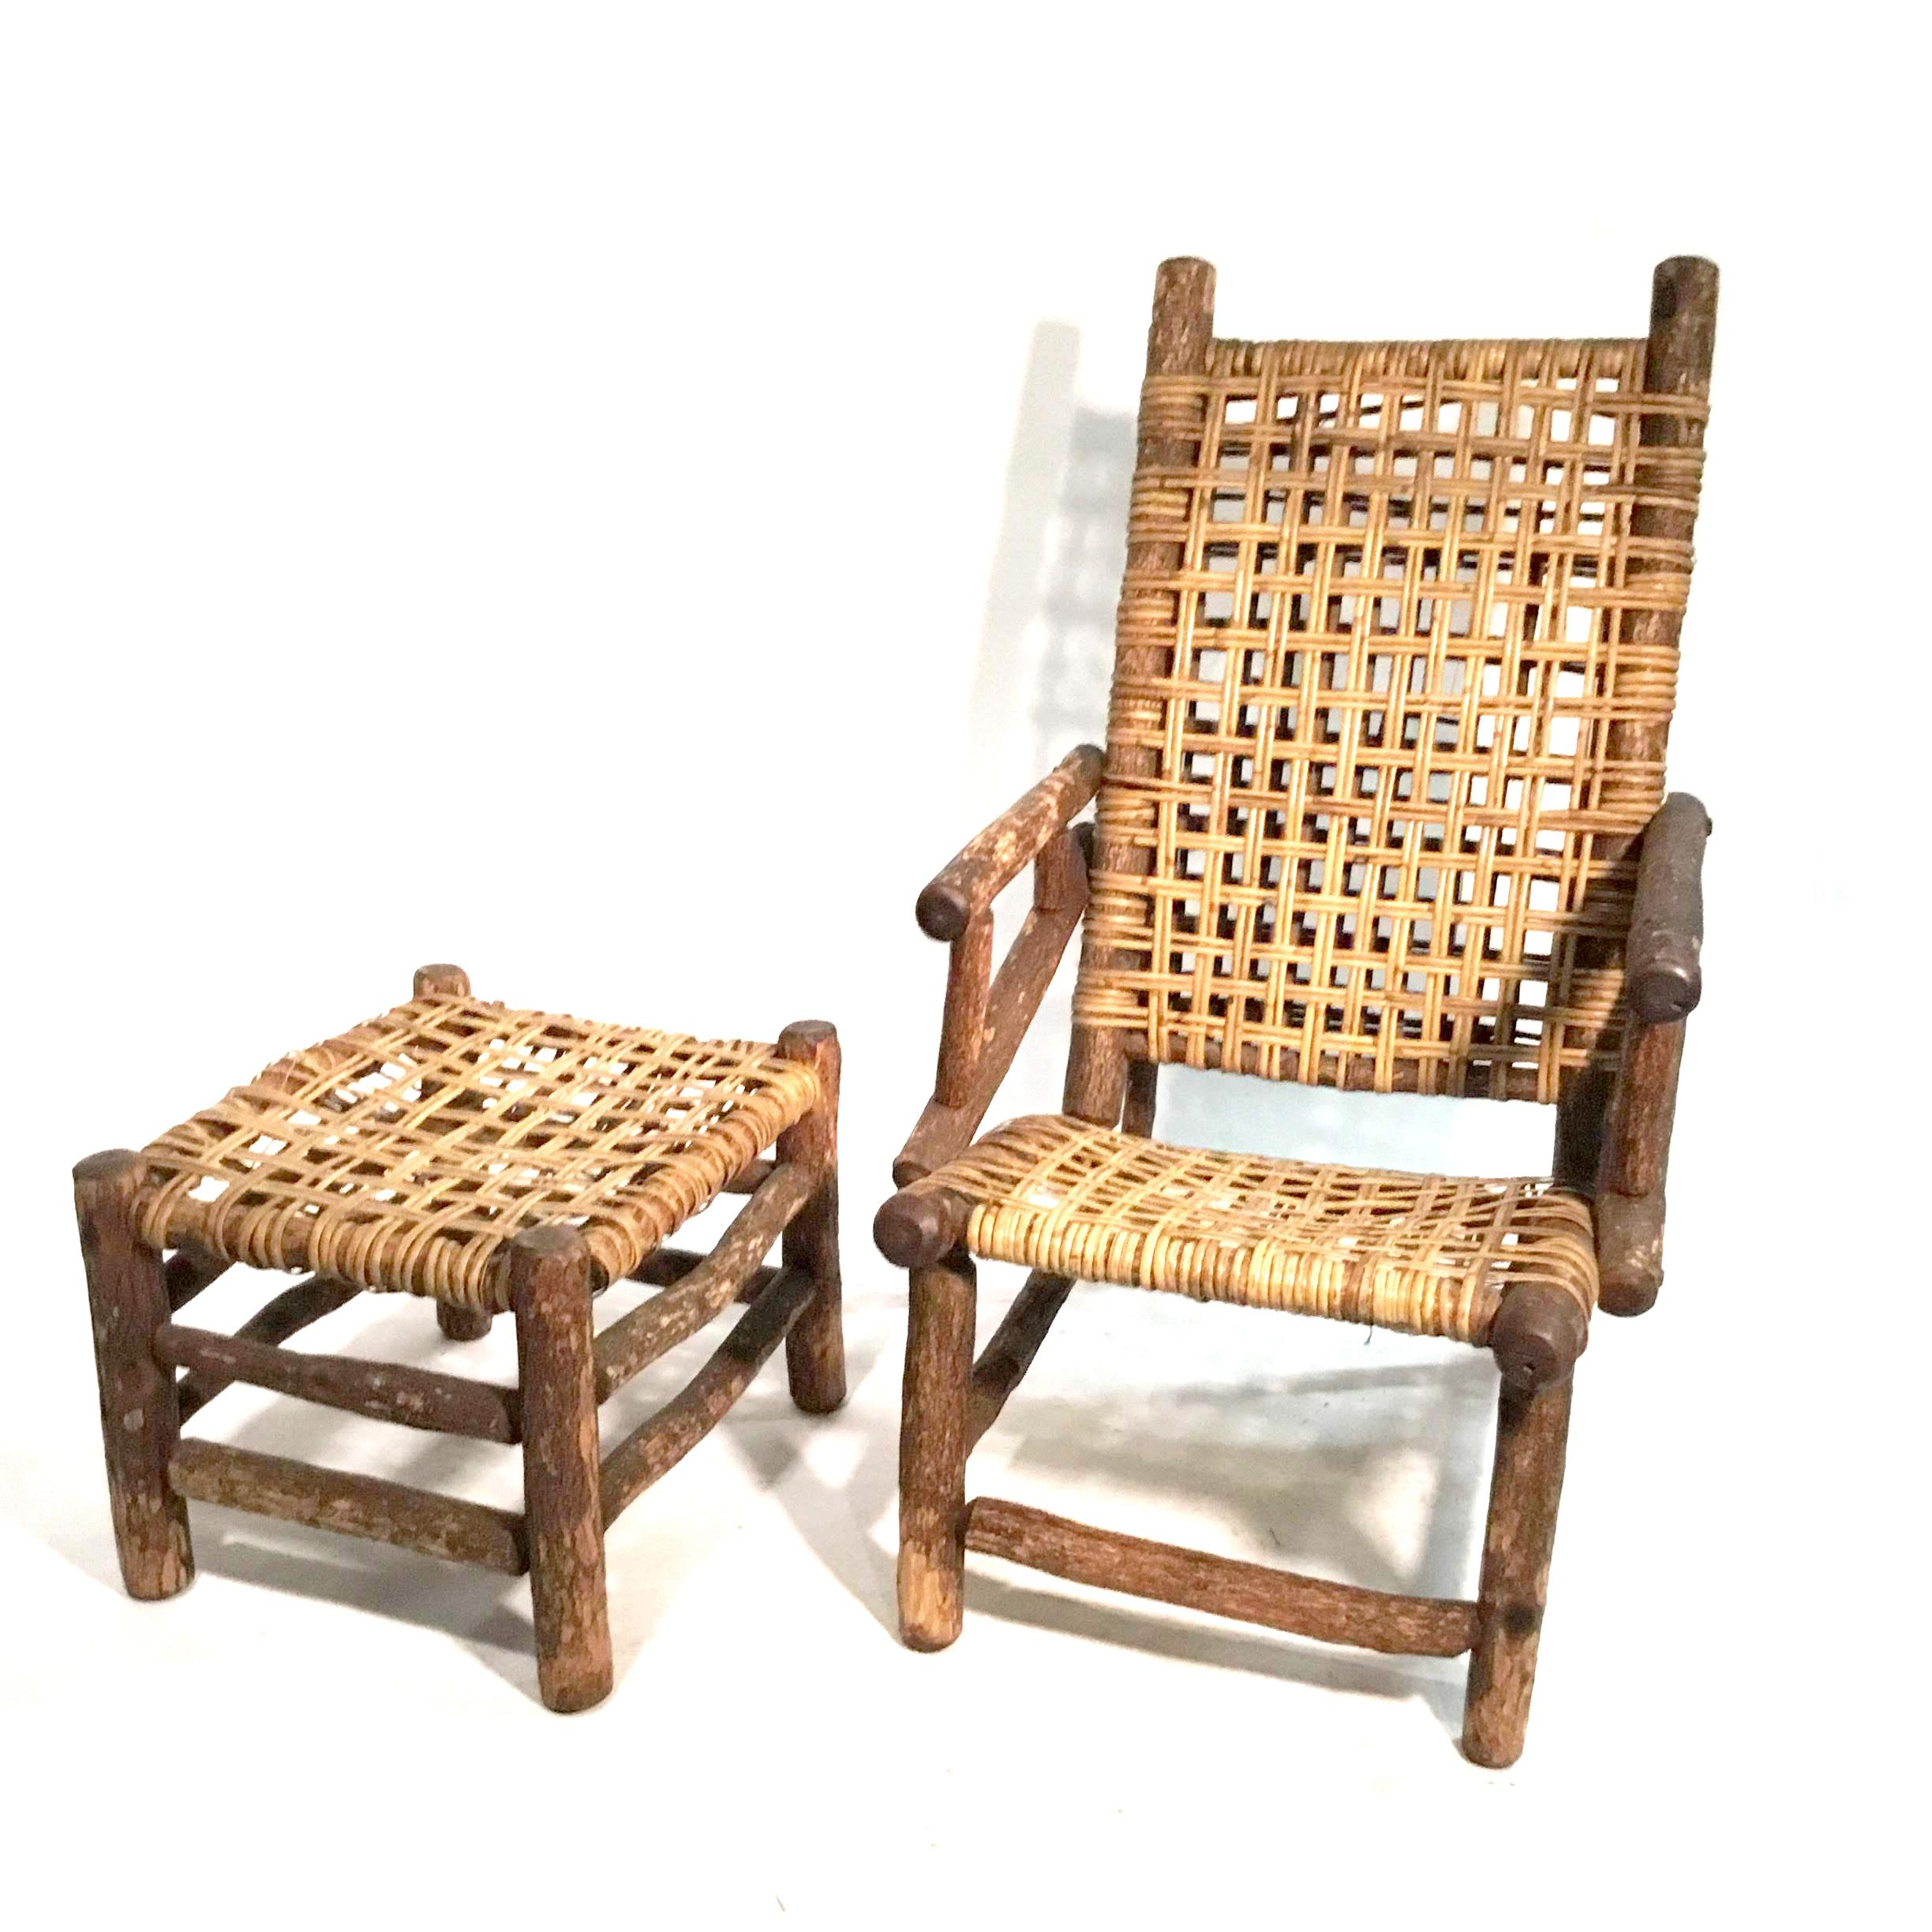 Old hickory style chair and ottoman with wooden frame and rattan seat
Measures: Chair: 34